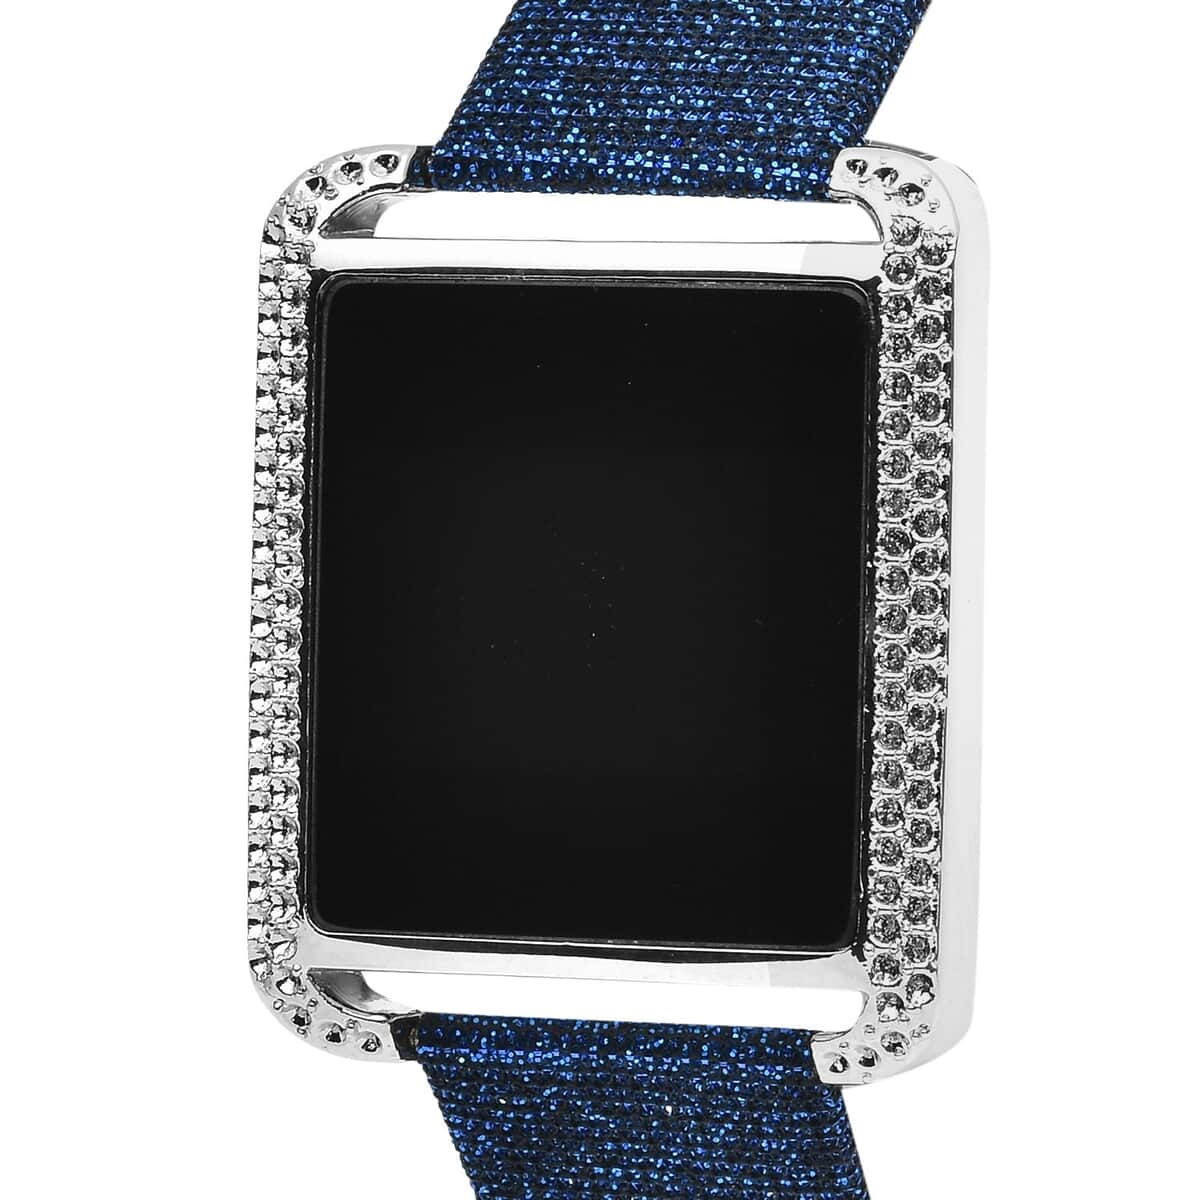 Strada Electronic Movement Digital Watch with Navy Blue Faux Leather & Stardust Strap (34mm) (6.75-8.50 Inch) image number 3